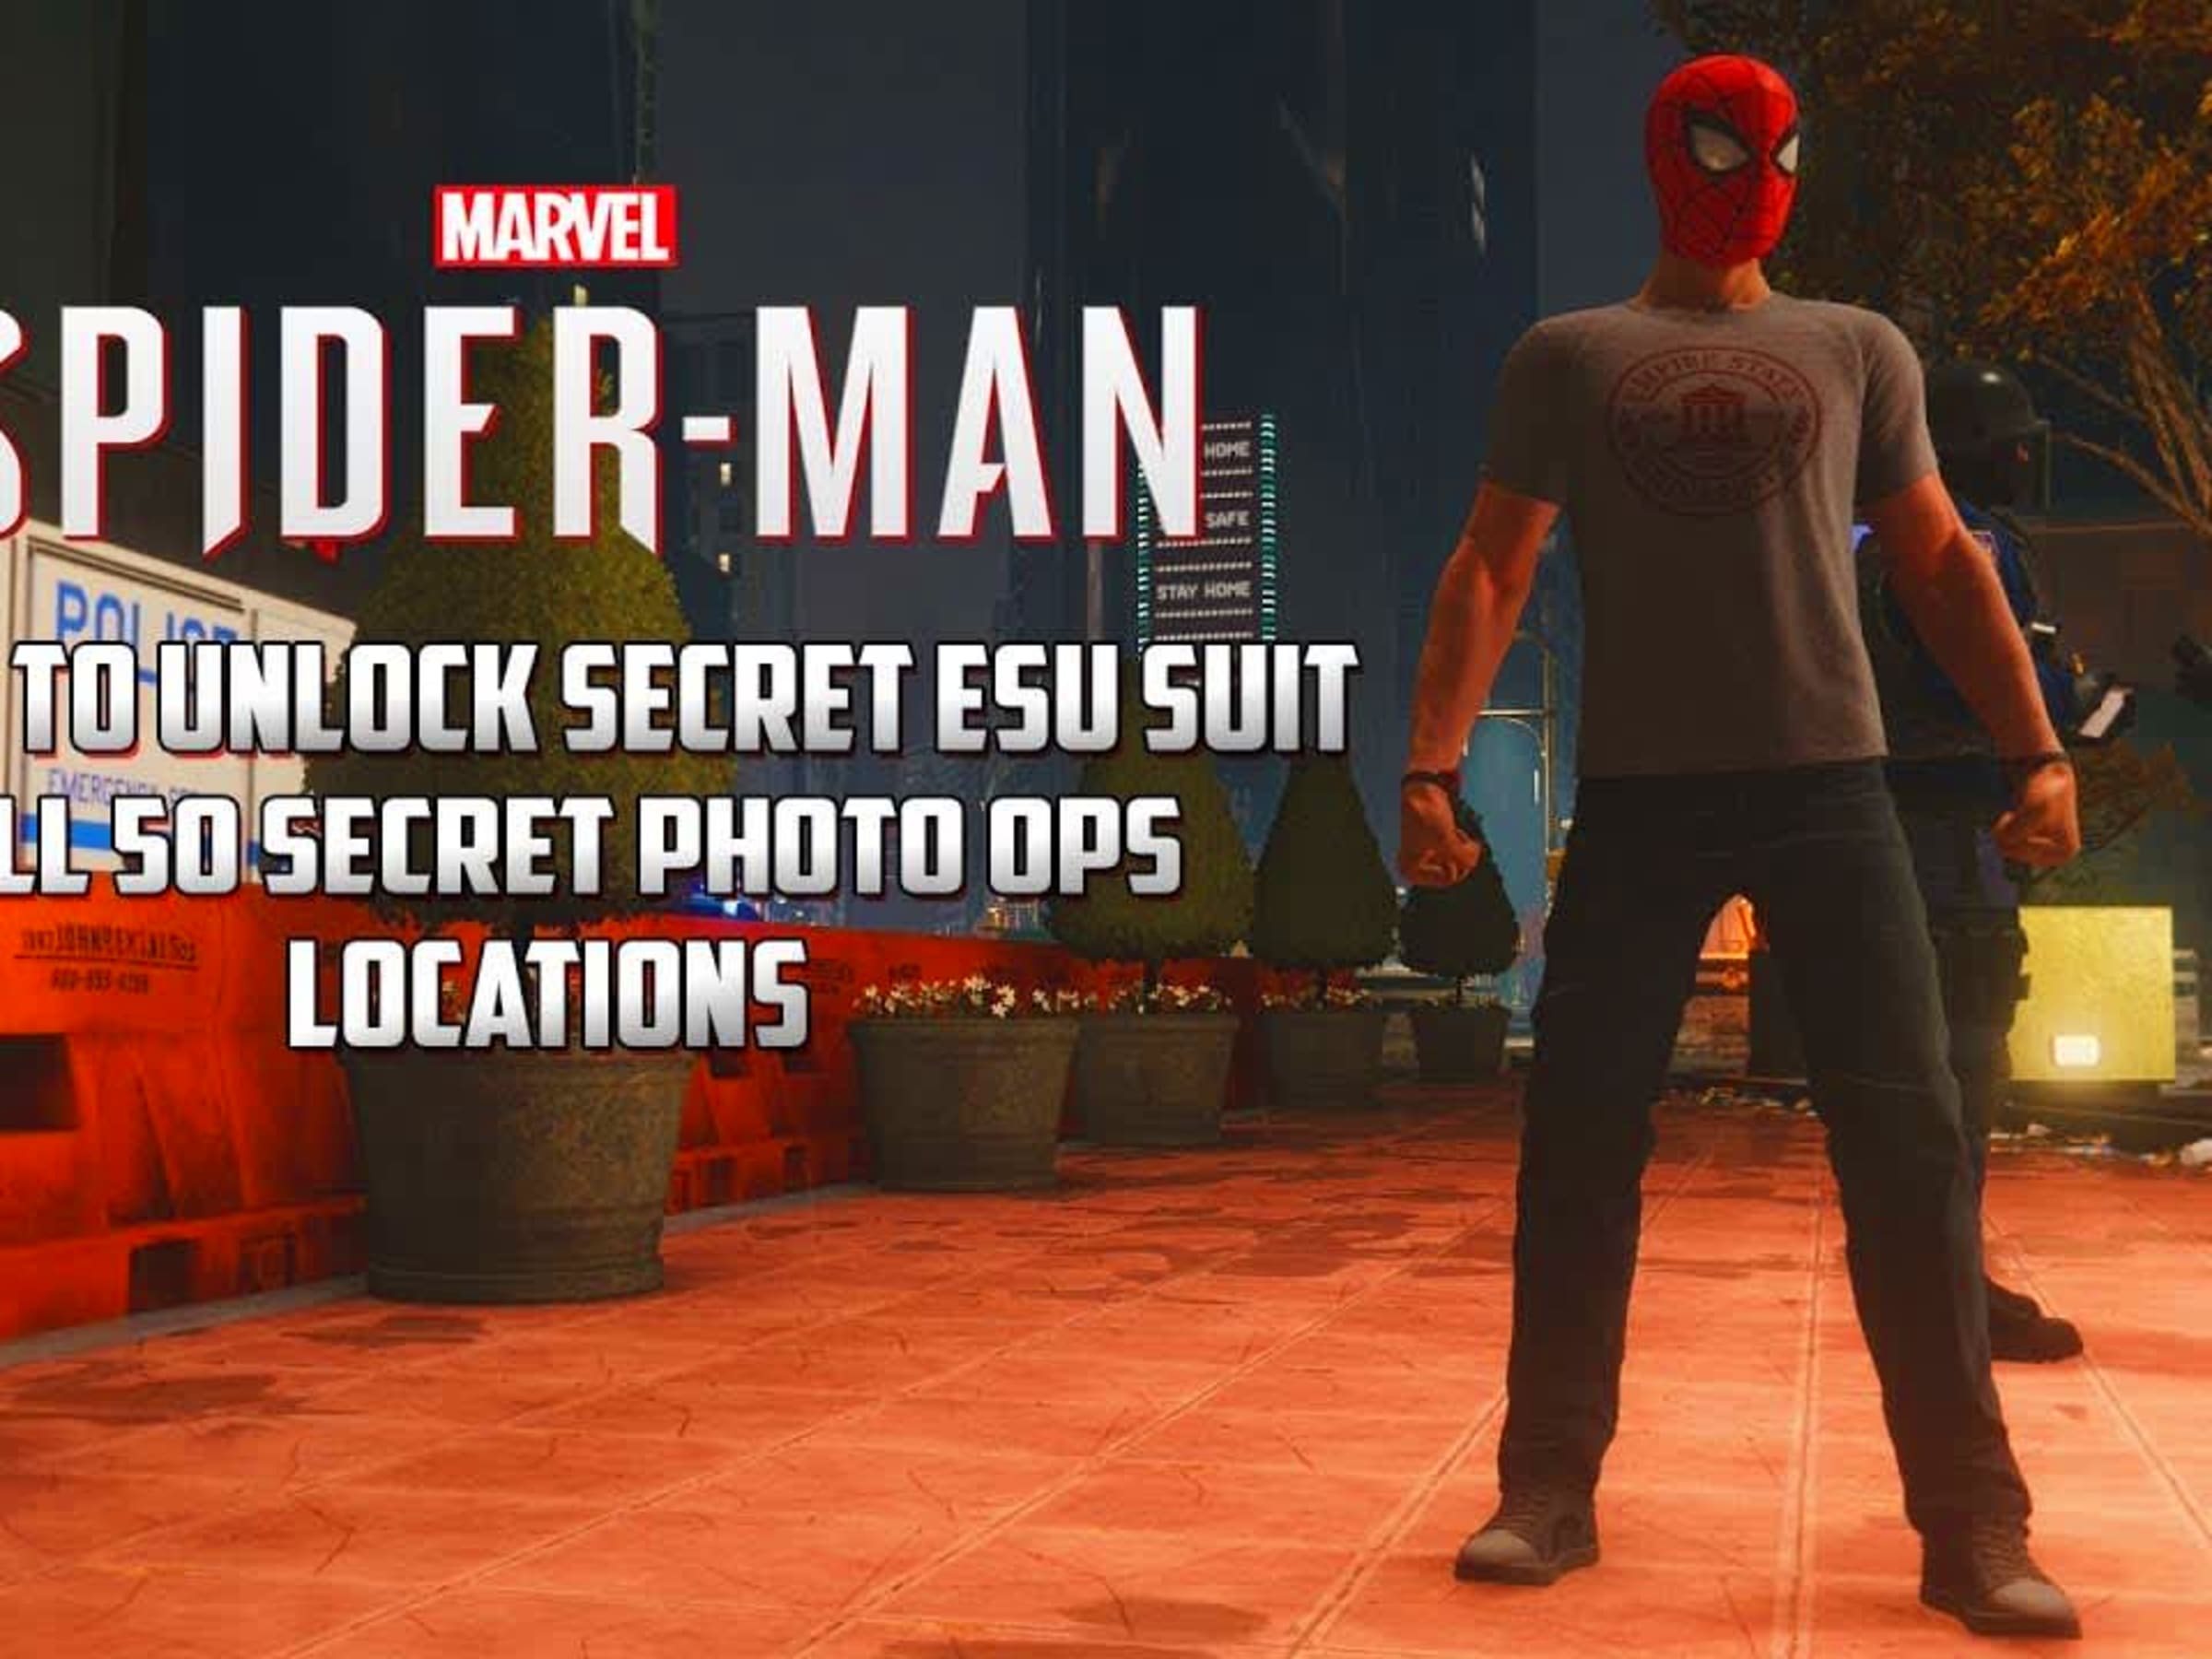 Spider-Man PS4: All Secret Ops Location Checklist - With Maps - ESU Suit by @trevord - Listium